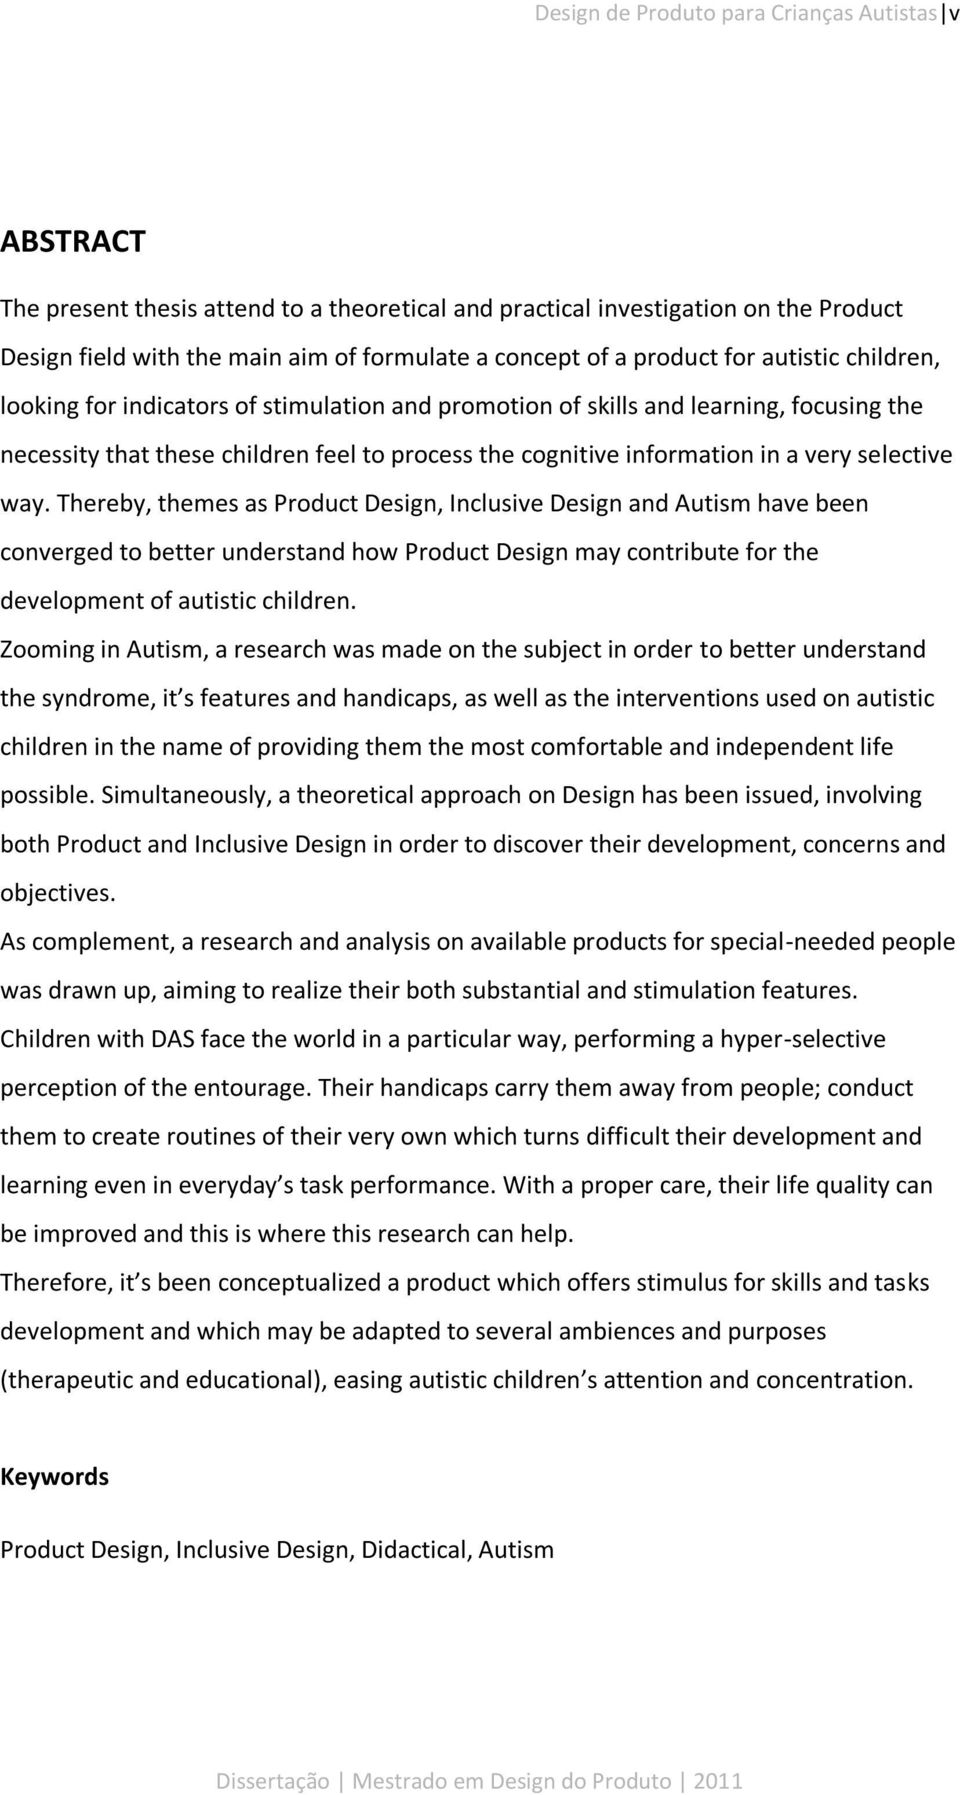 very selective way. Thereby, themes as Product Design, Inclusive Design and Autism have been converged to better understand how Product Design may contribute for the development of autistic children.